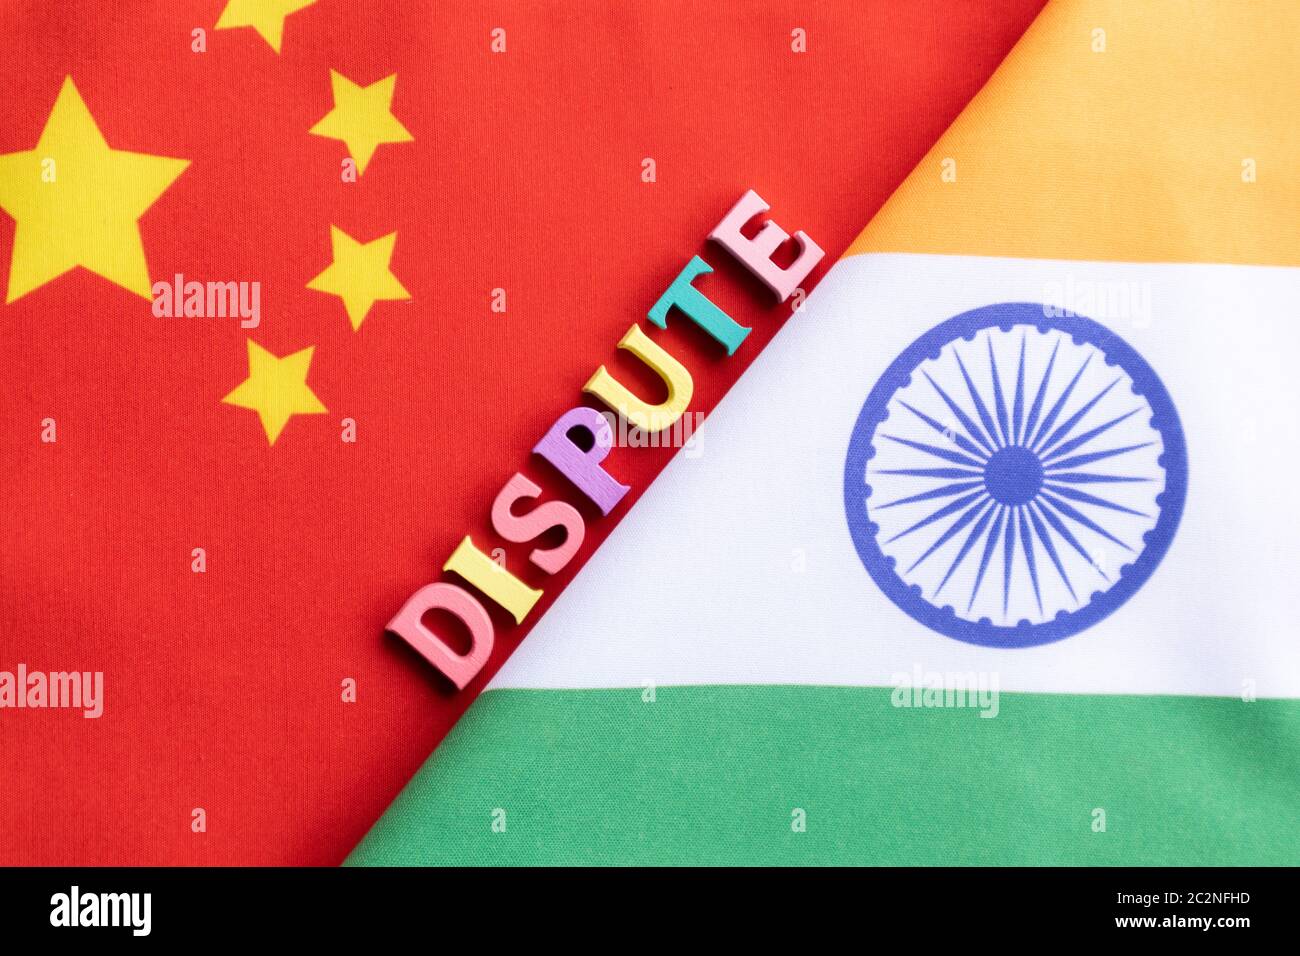 Concept showing of Dispute between the India and China with Flags. Stock Photo